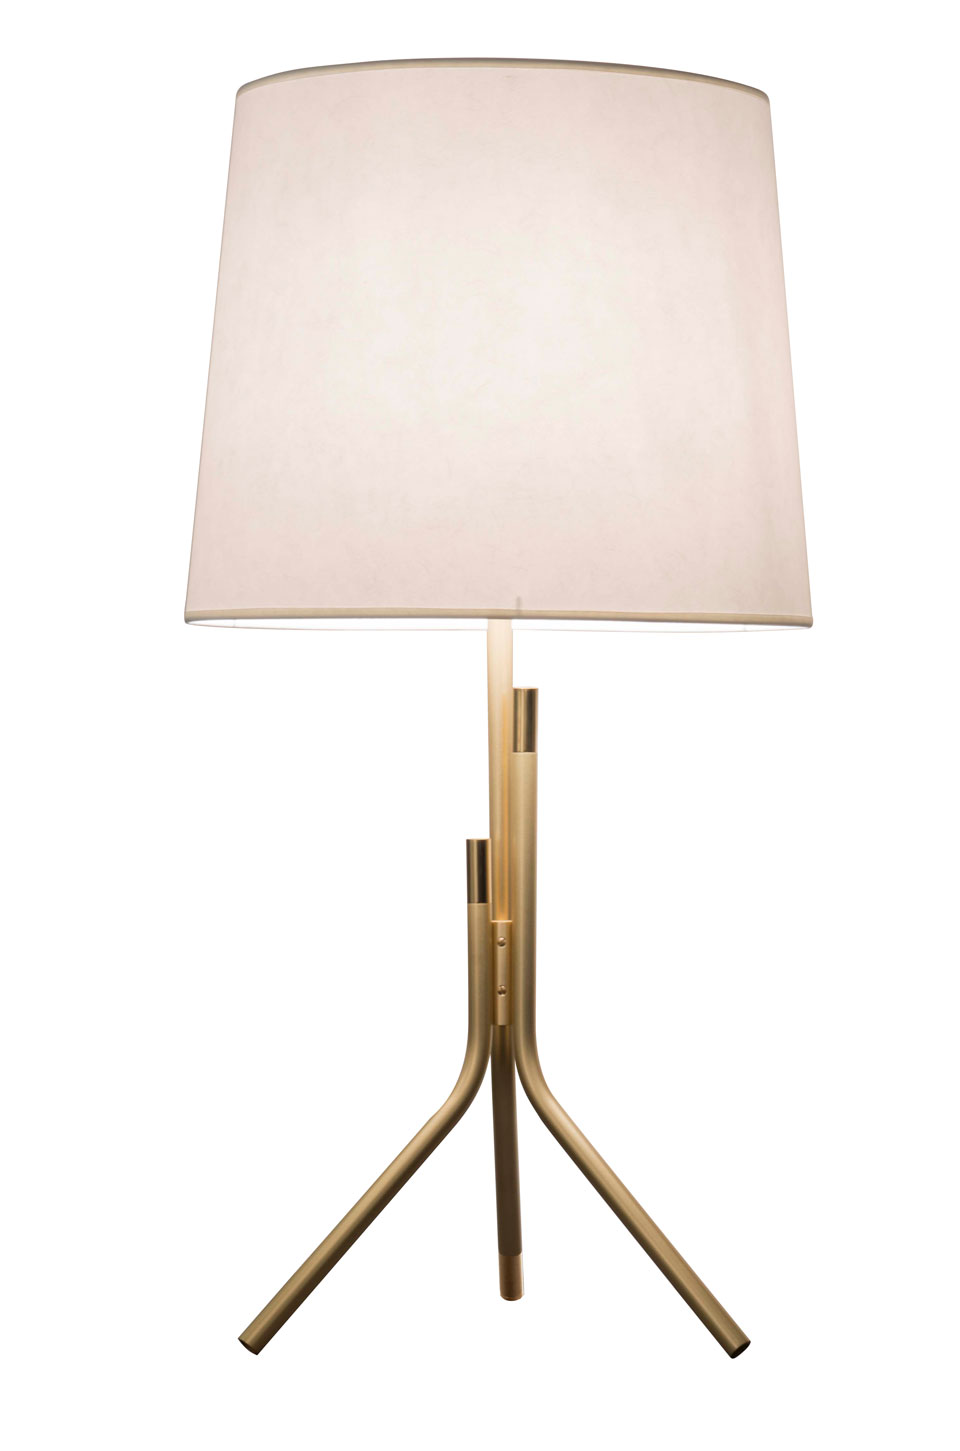 Ellis Design Table Lamp Matte Gold And, Big White Table Lamps